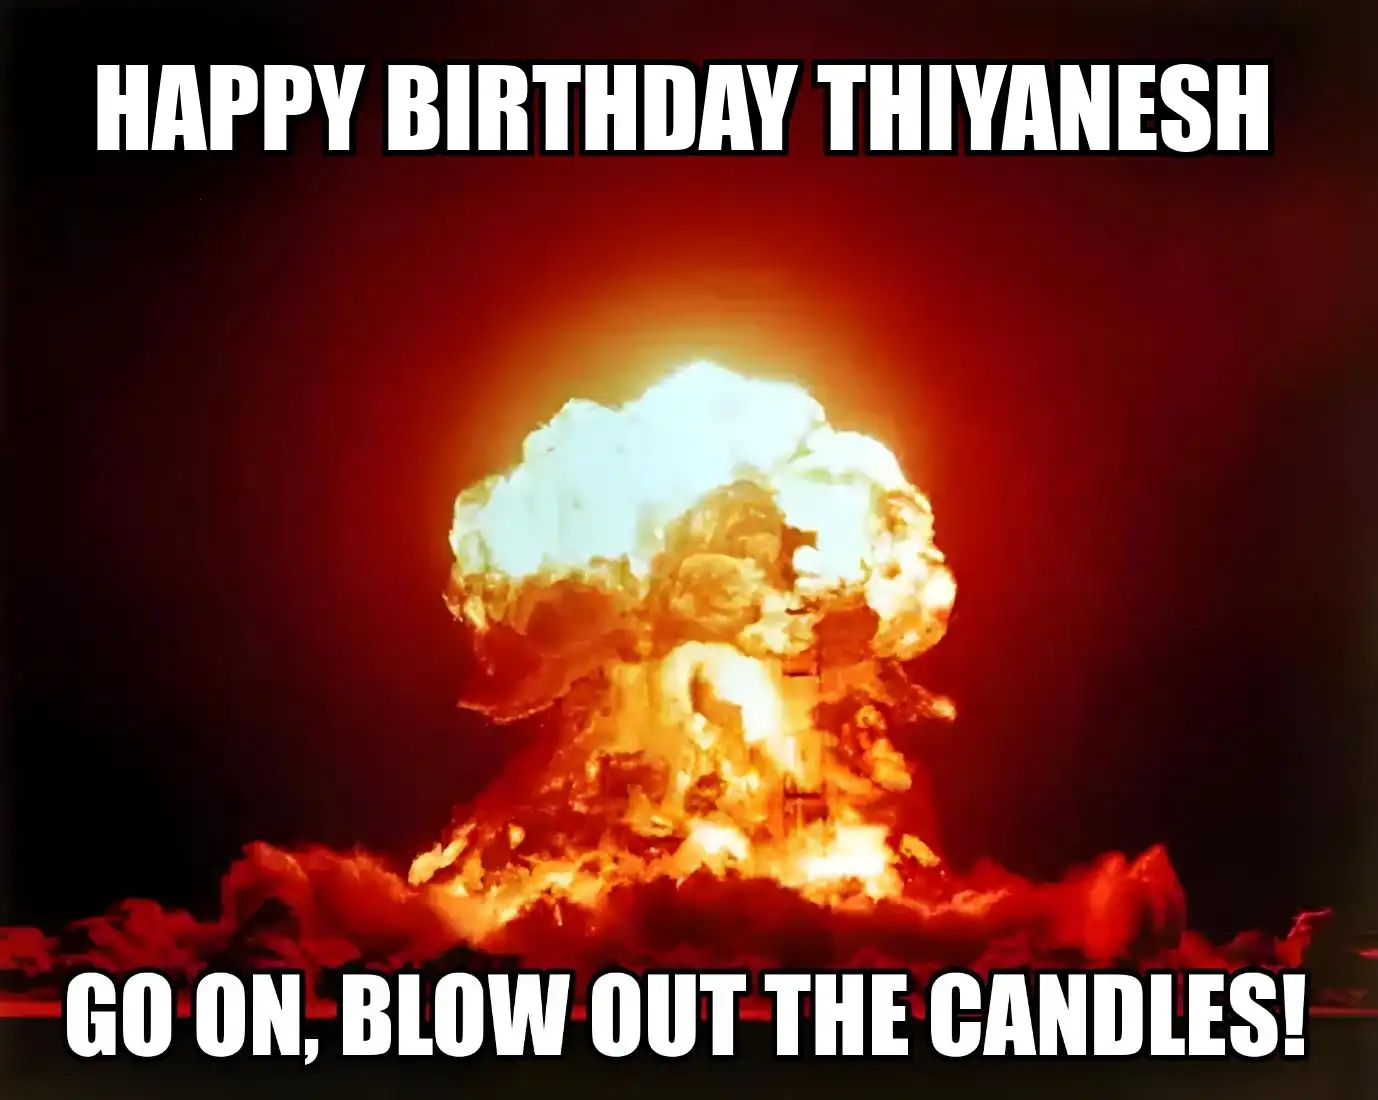 Happy Birthday Thiyanesh Go On Blow Out The Candles Meme